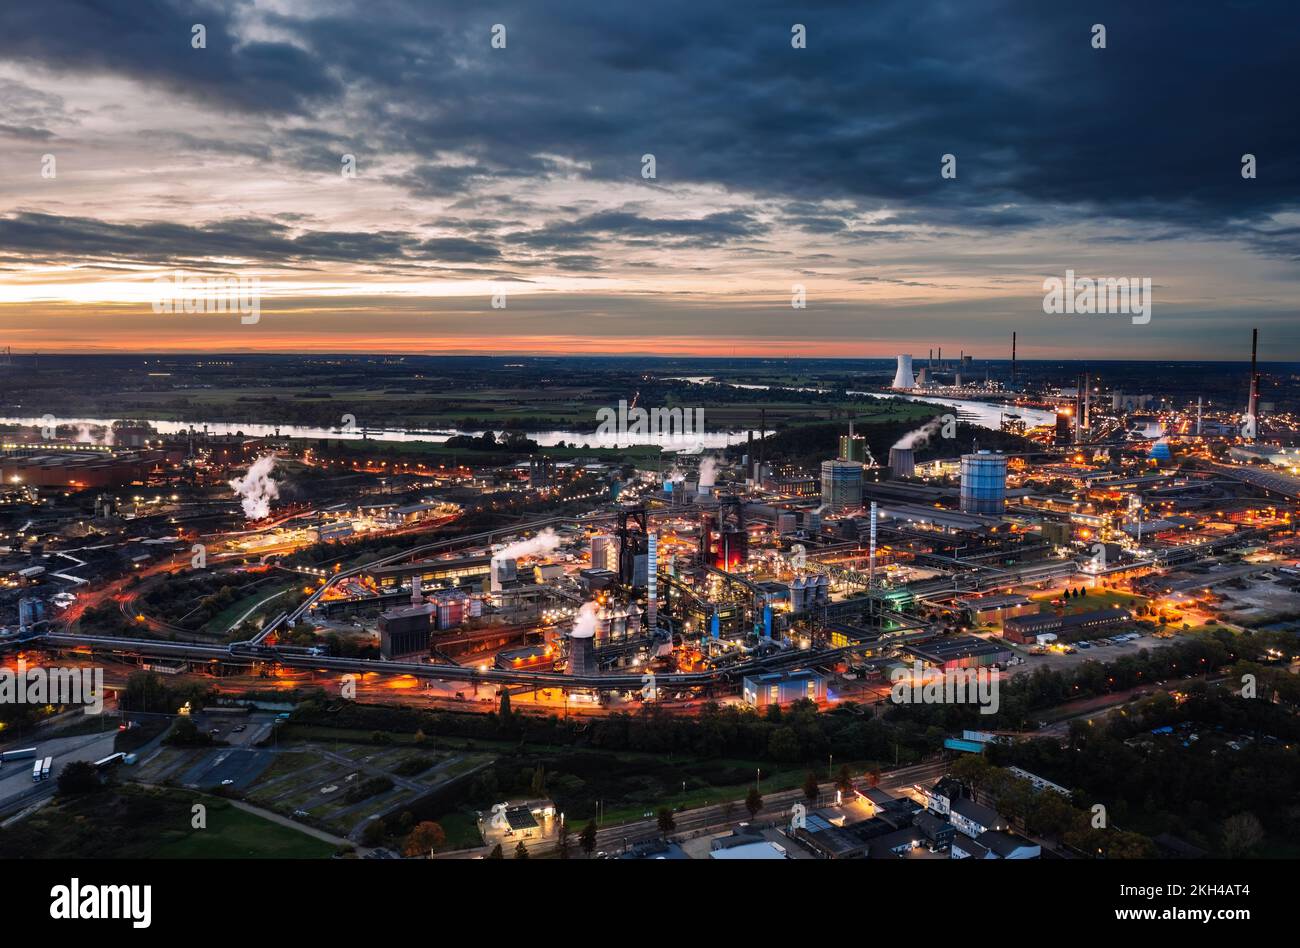 Duisburg, Germany, Industry of Ruhr: Aerial night skyline view of ThyssenKrupp steel production plant with industrial blast furnace Stock Photo